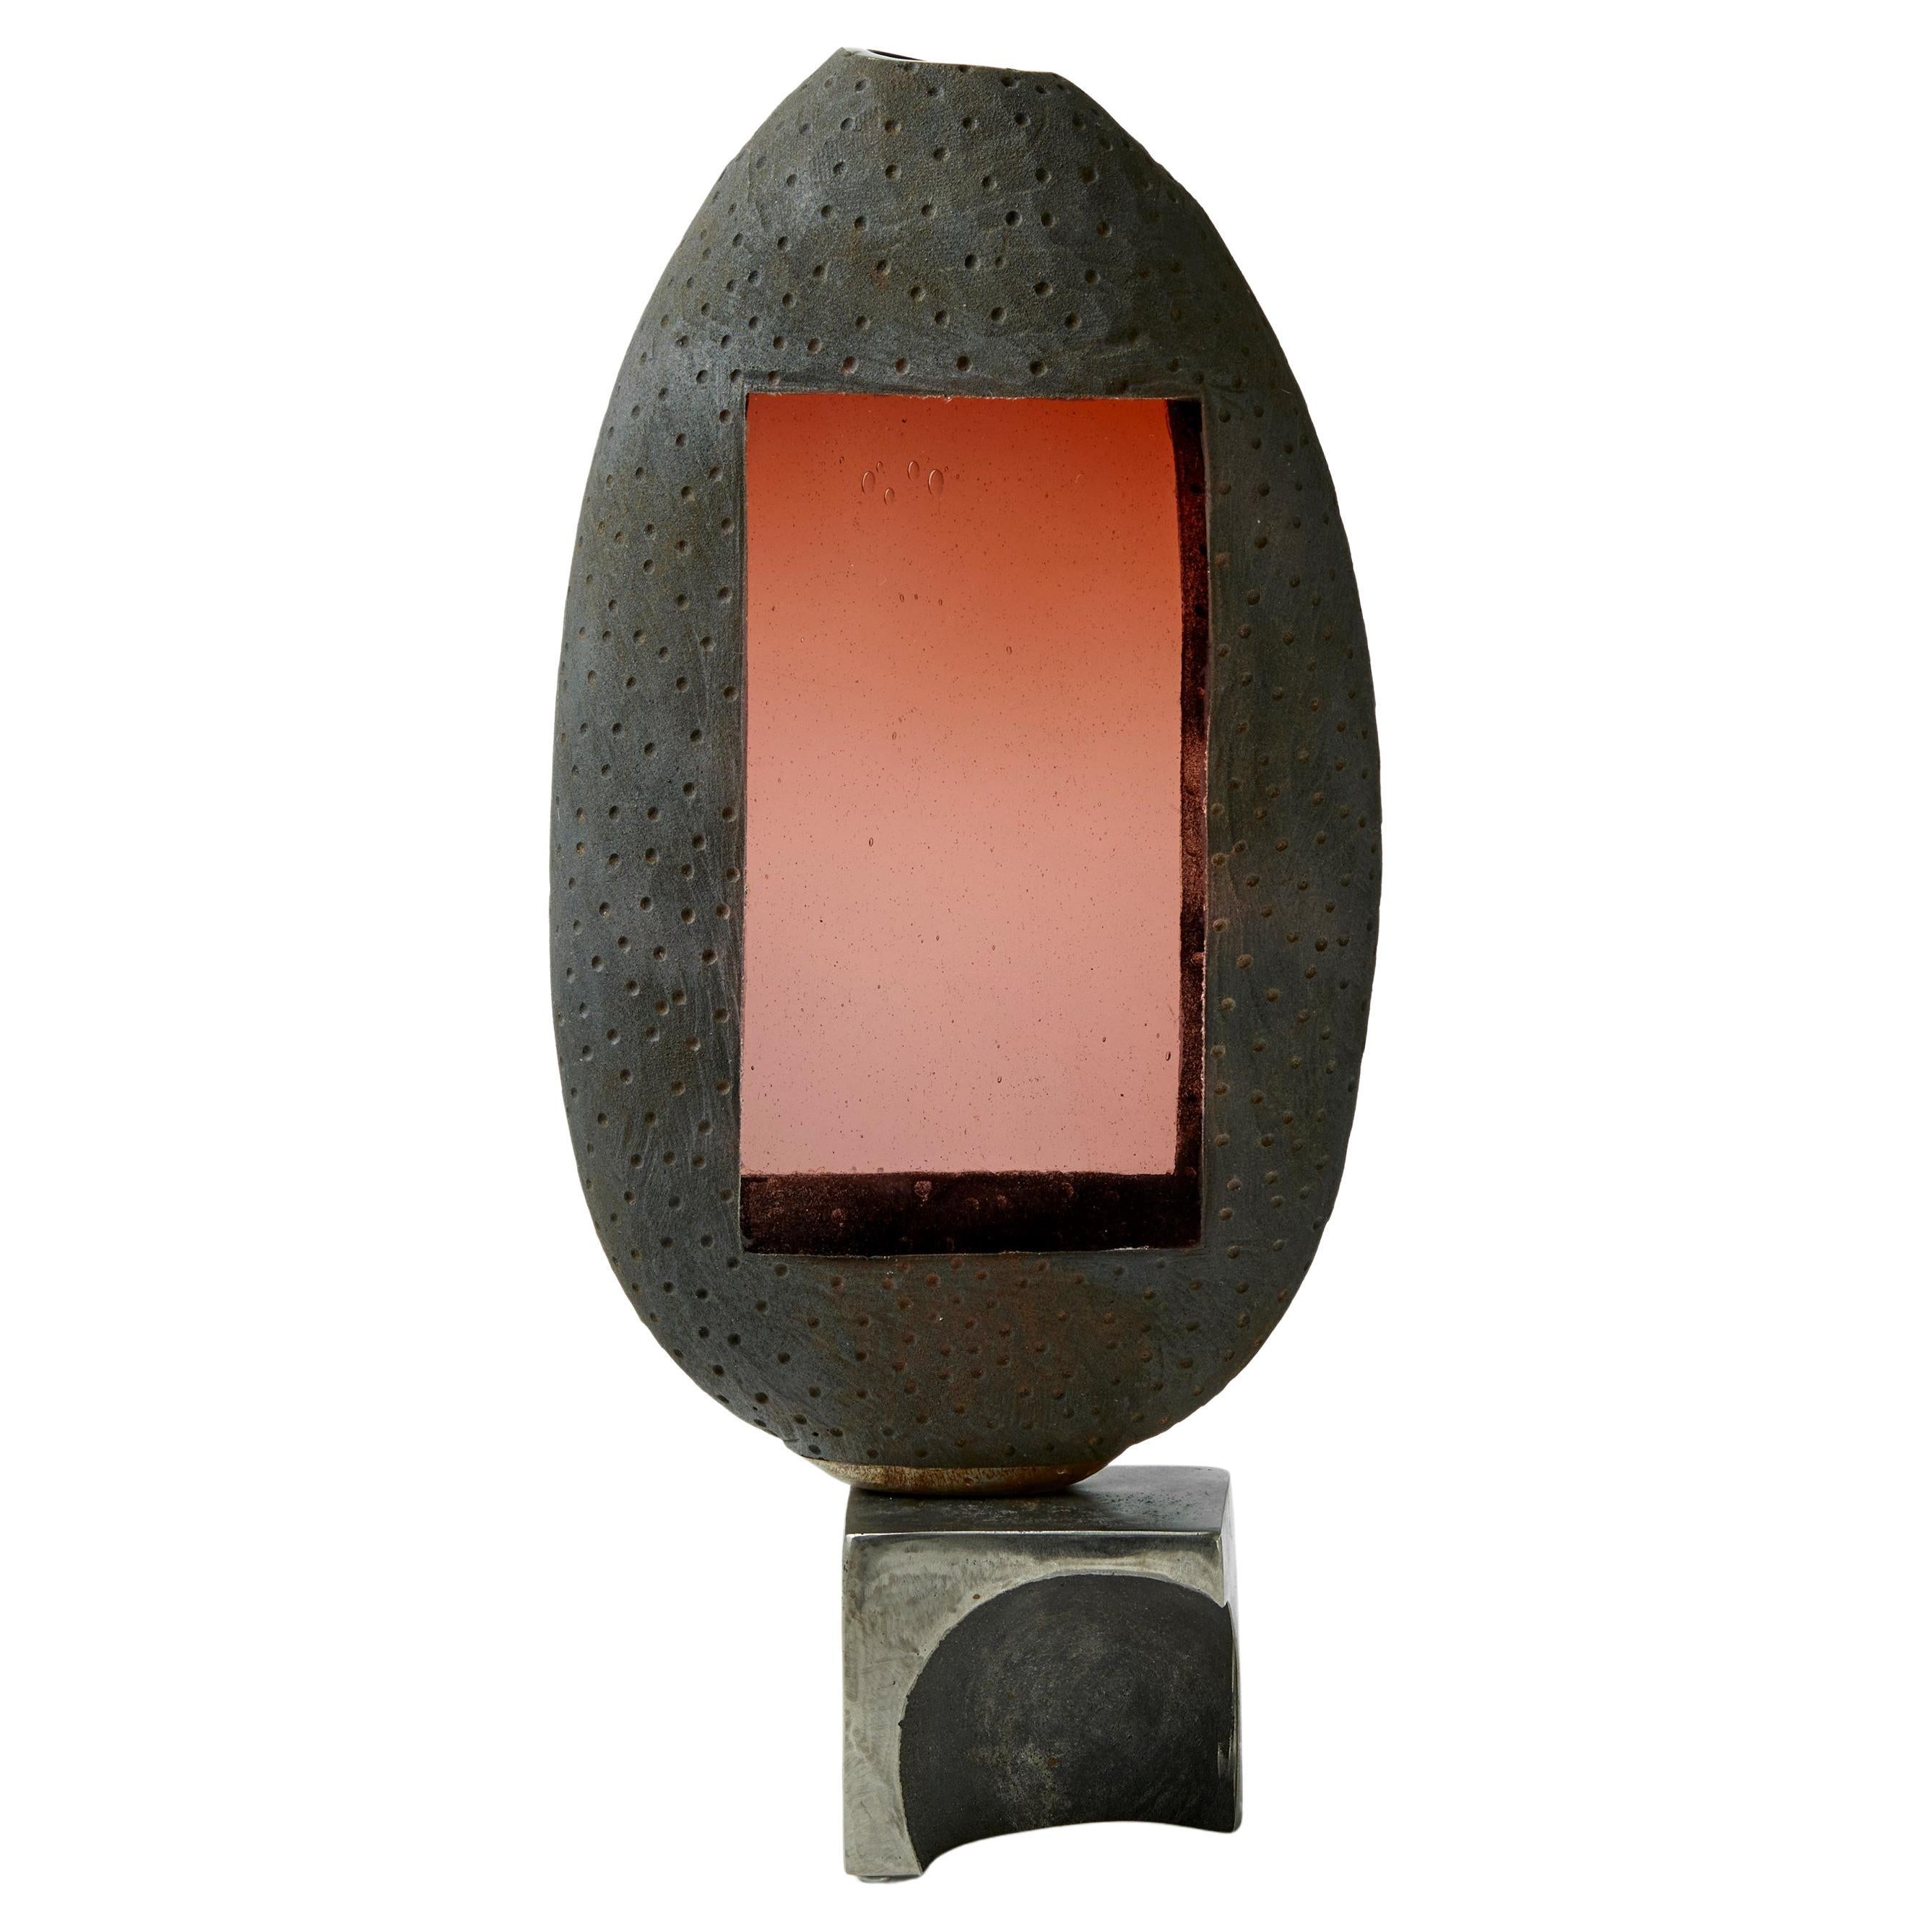 Apertura Smokey Peach 08, a Pink & Grey Glass and Steel Sculpture by Jon Lewis